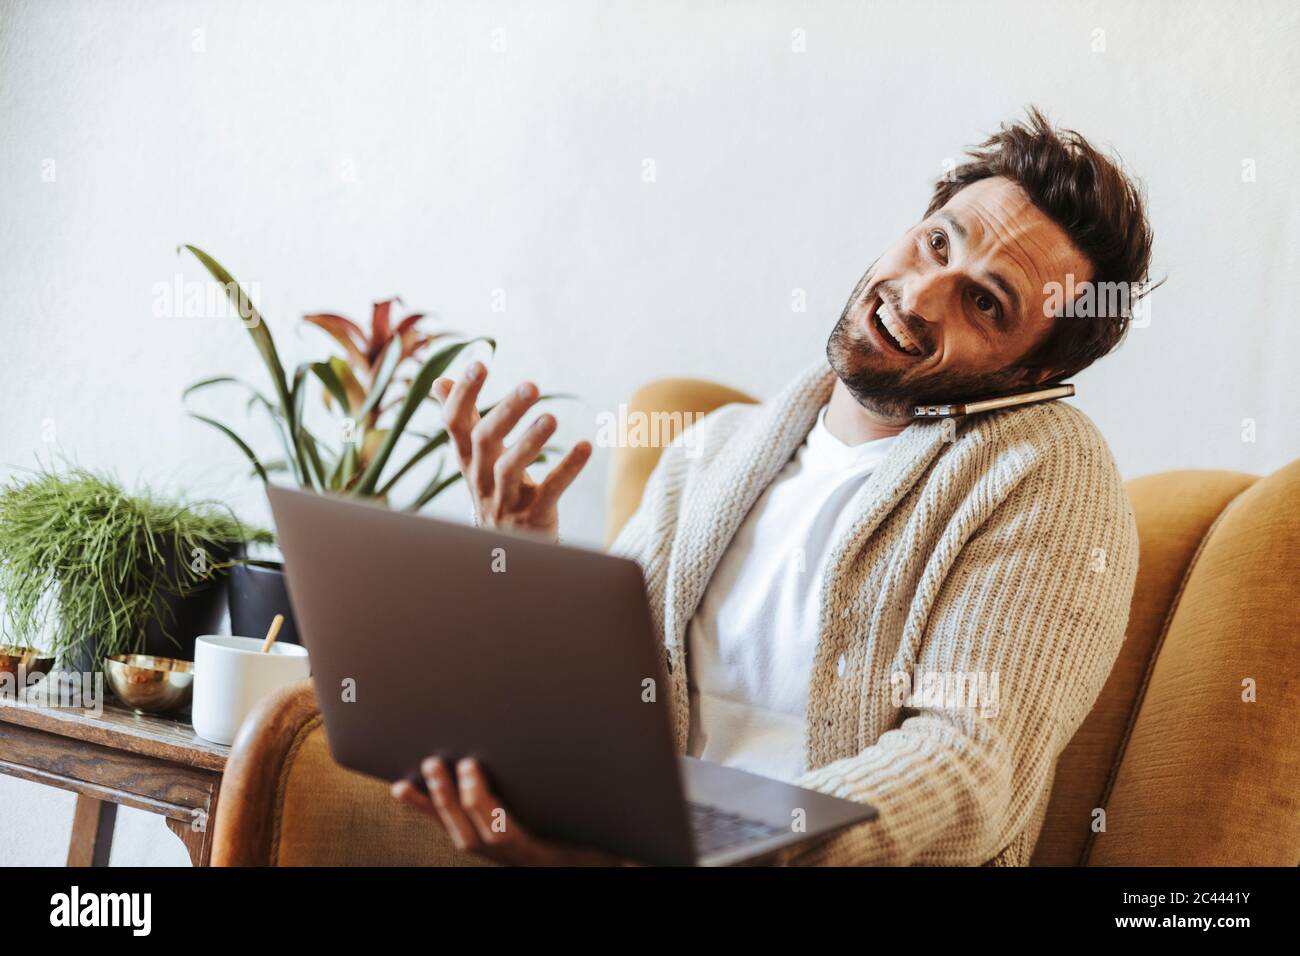 Portrait of man on the phone sitting on armchair with laptop pulling funny faces Stock Photo